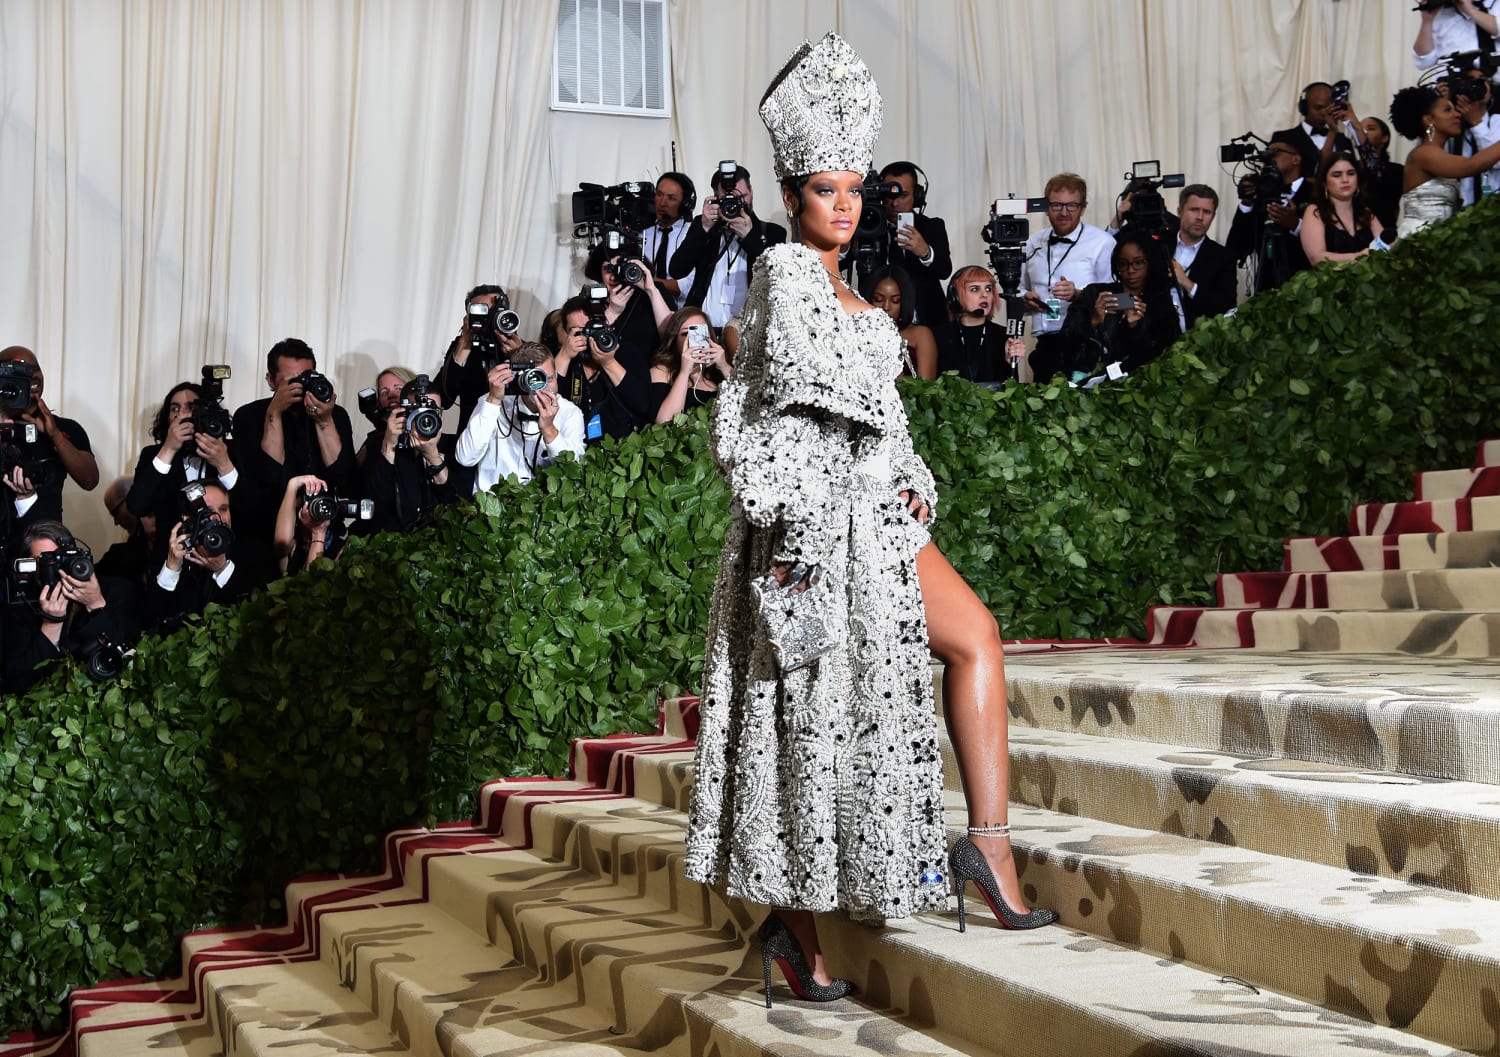 What Is 'Camp'? This Year'S Elusive Met Gala Theme